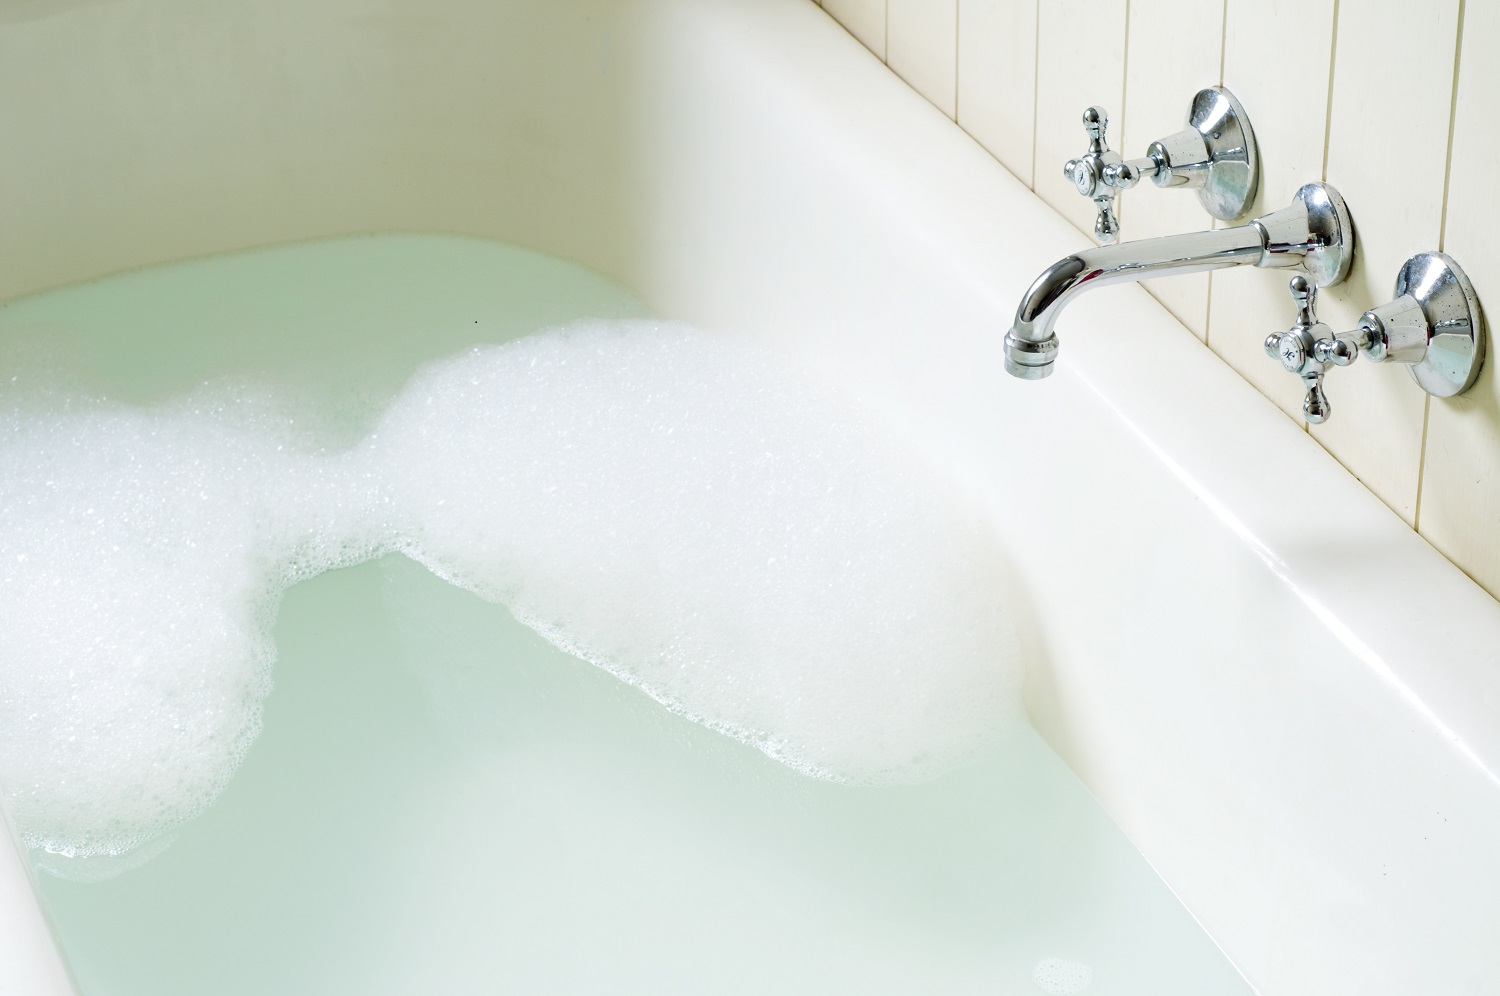 How to Remedy a Slow-Draining or Clogged Bathtub - Christiansonco